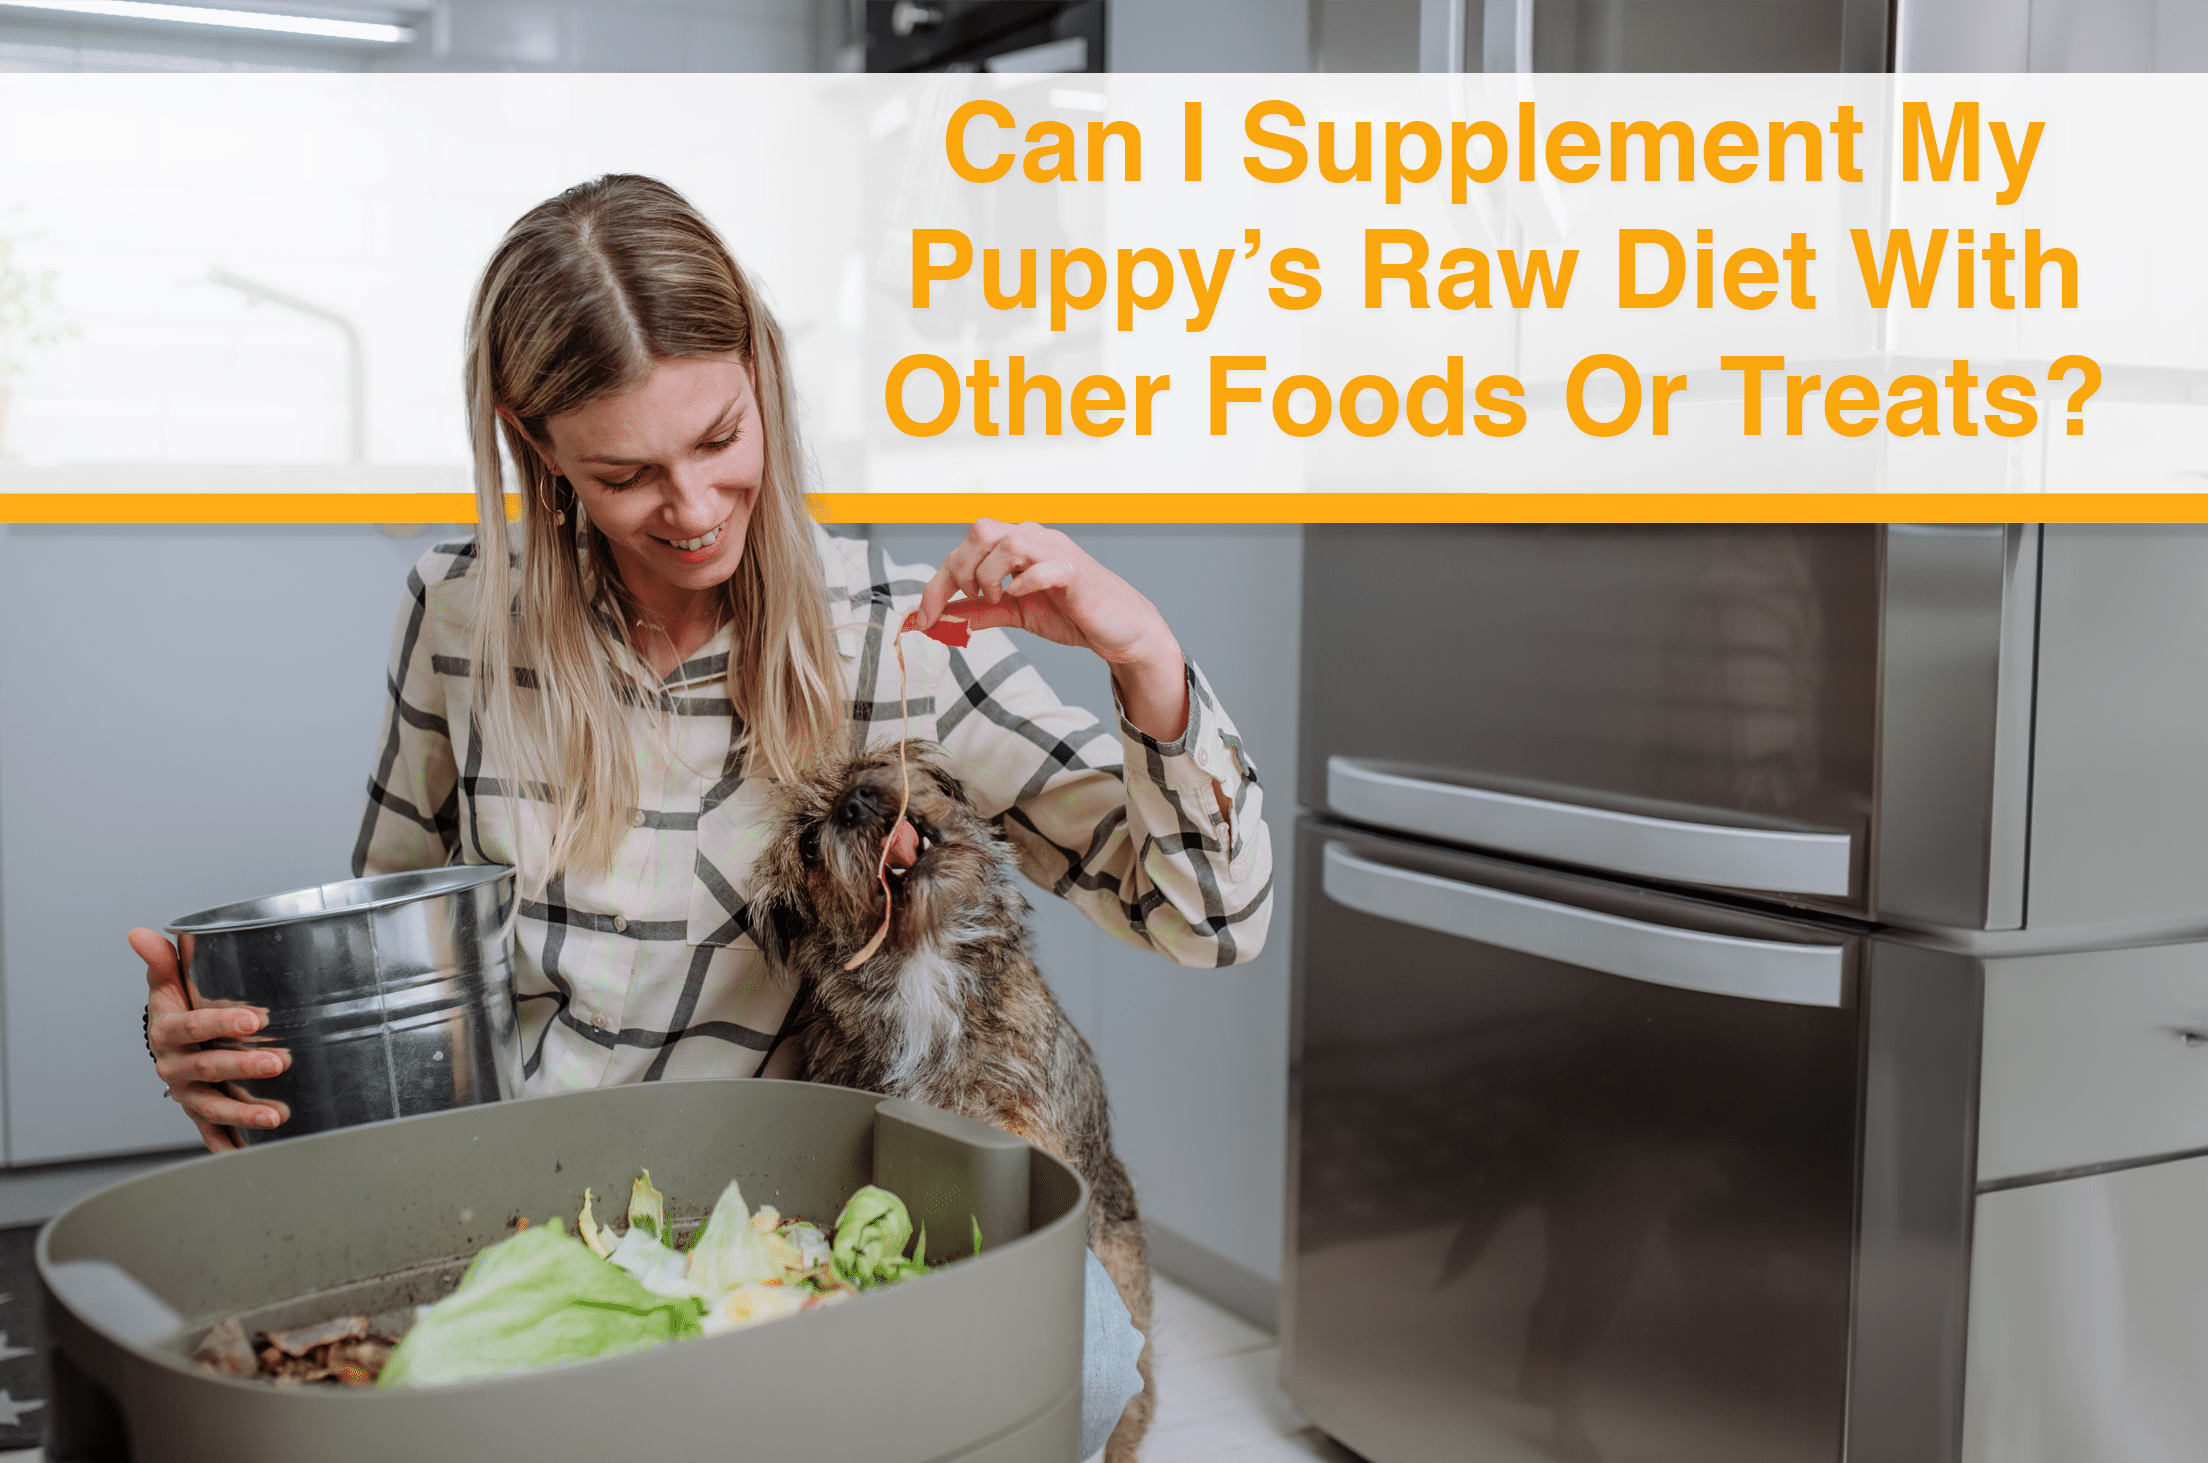 Can I Supplement My Puppy’s Raw Diet With Other Foods Or Treats